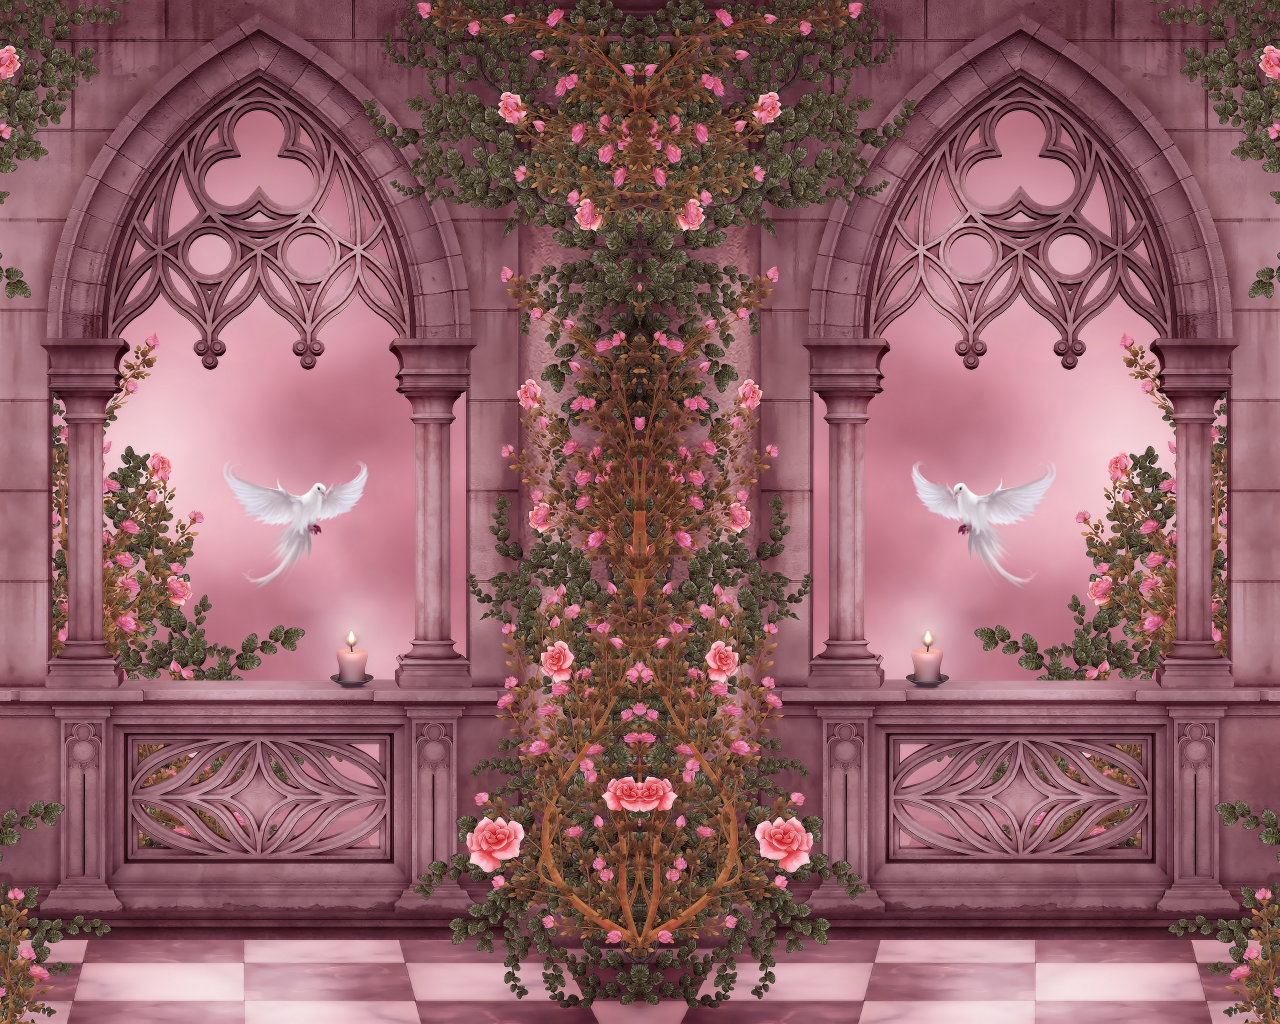 doves, roses, columns, arches, pigeons, flowers, candles, garlands, rose garden